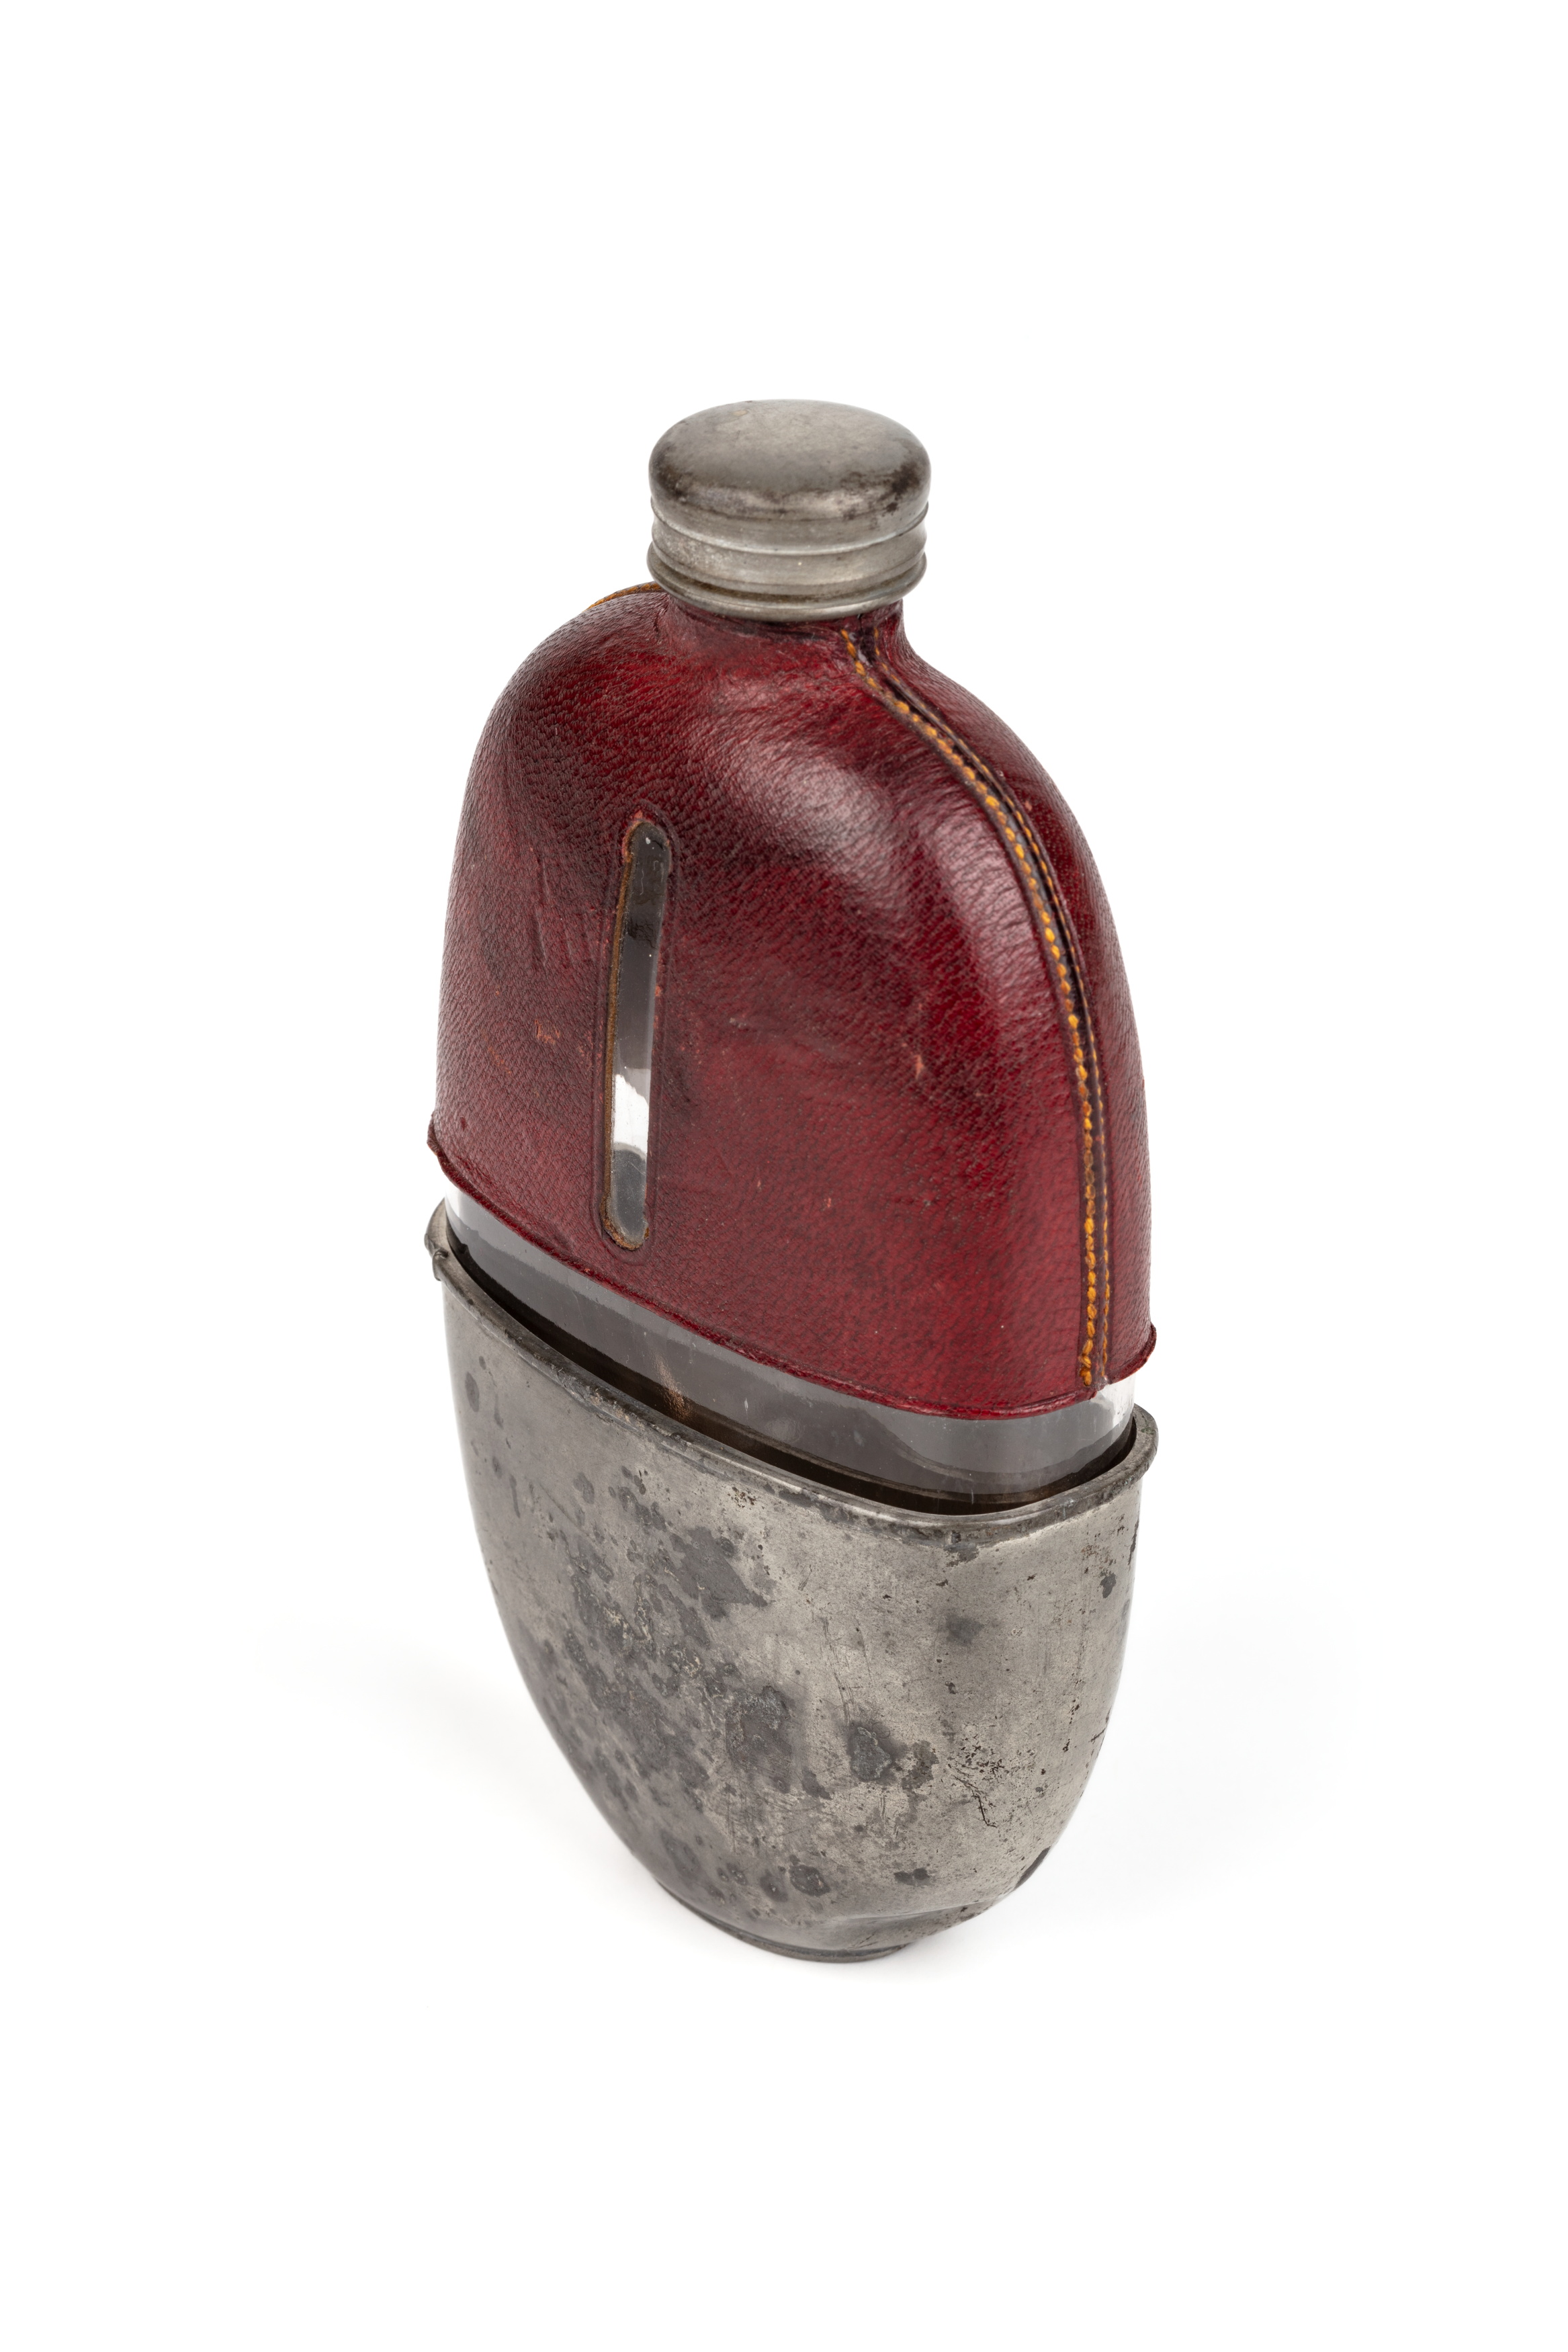 Oval shaped glass brandy flask with a red leather and metal cover